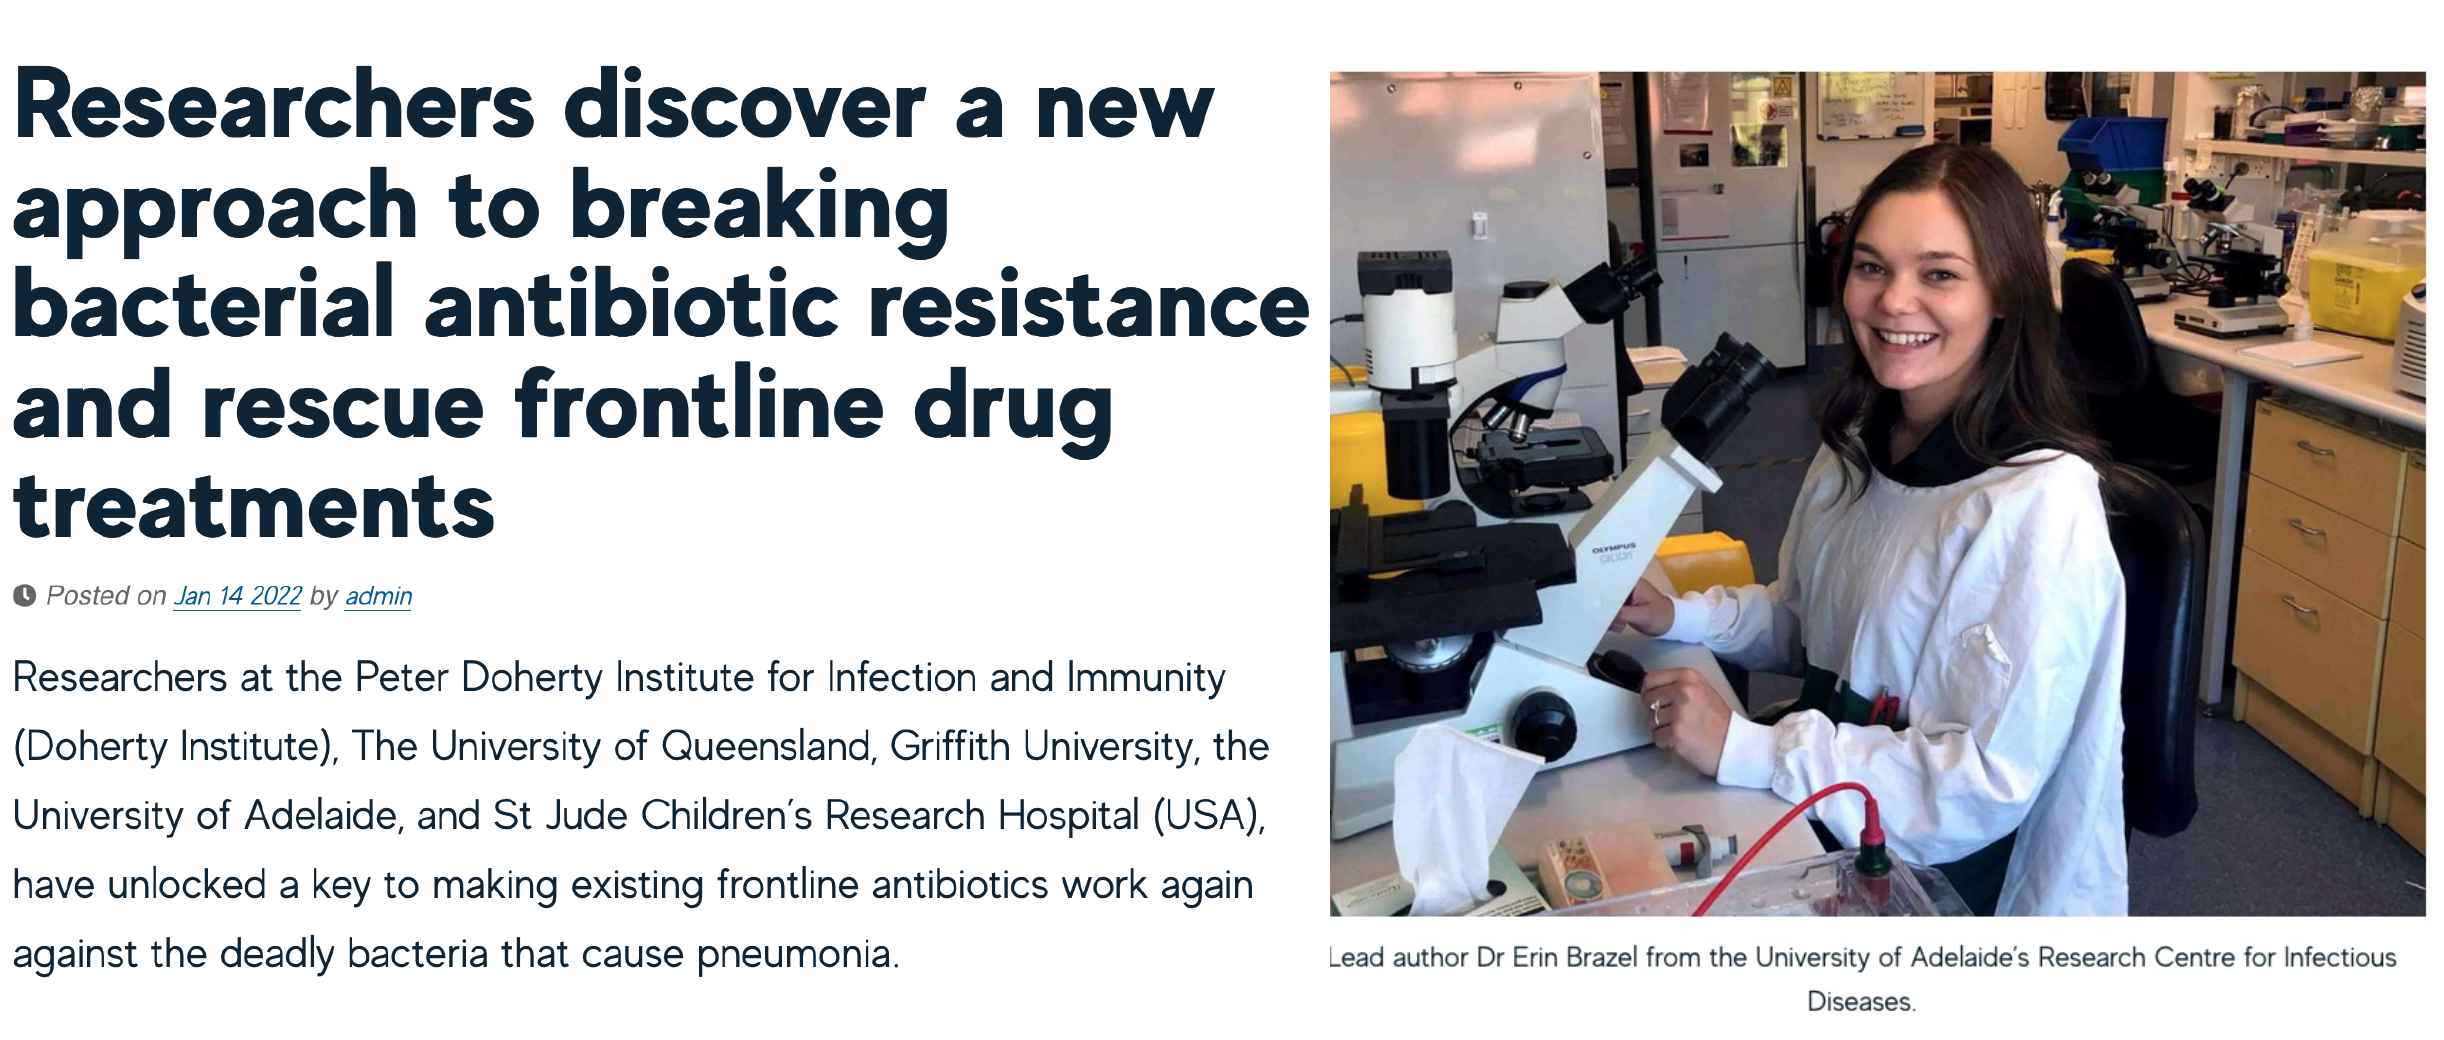 Researchers discover a new approach to breaking bacterial antibiotic resistance and rescue frontline drug treatments